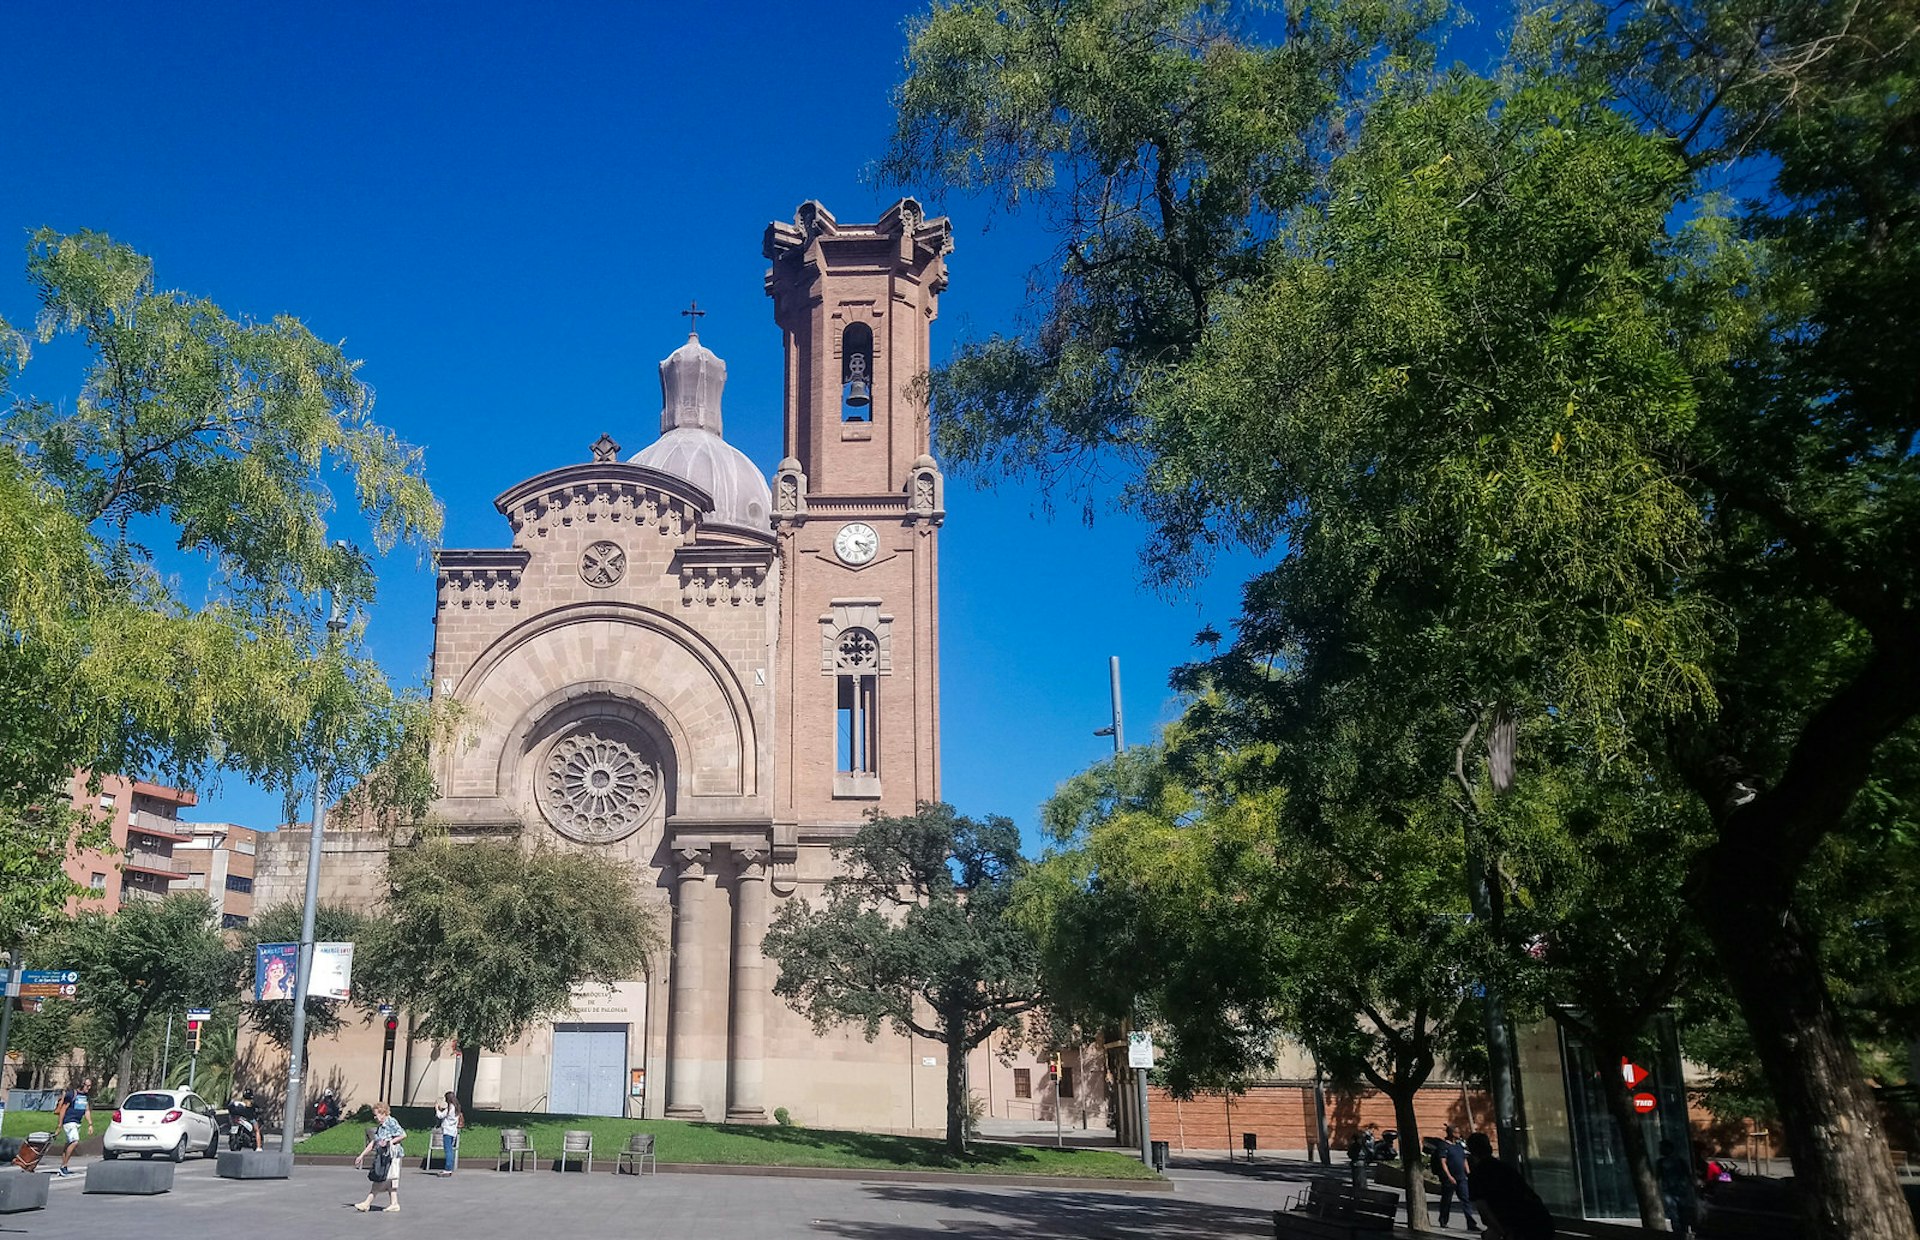 The pink-hued, neo-Gothic Church of Sant Andreu in Barcelona; the church has a tower and a rose window and sits in a leafy square.